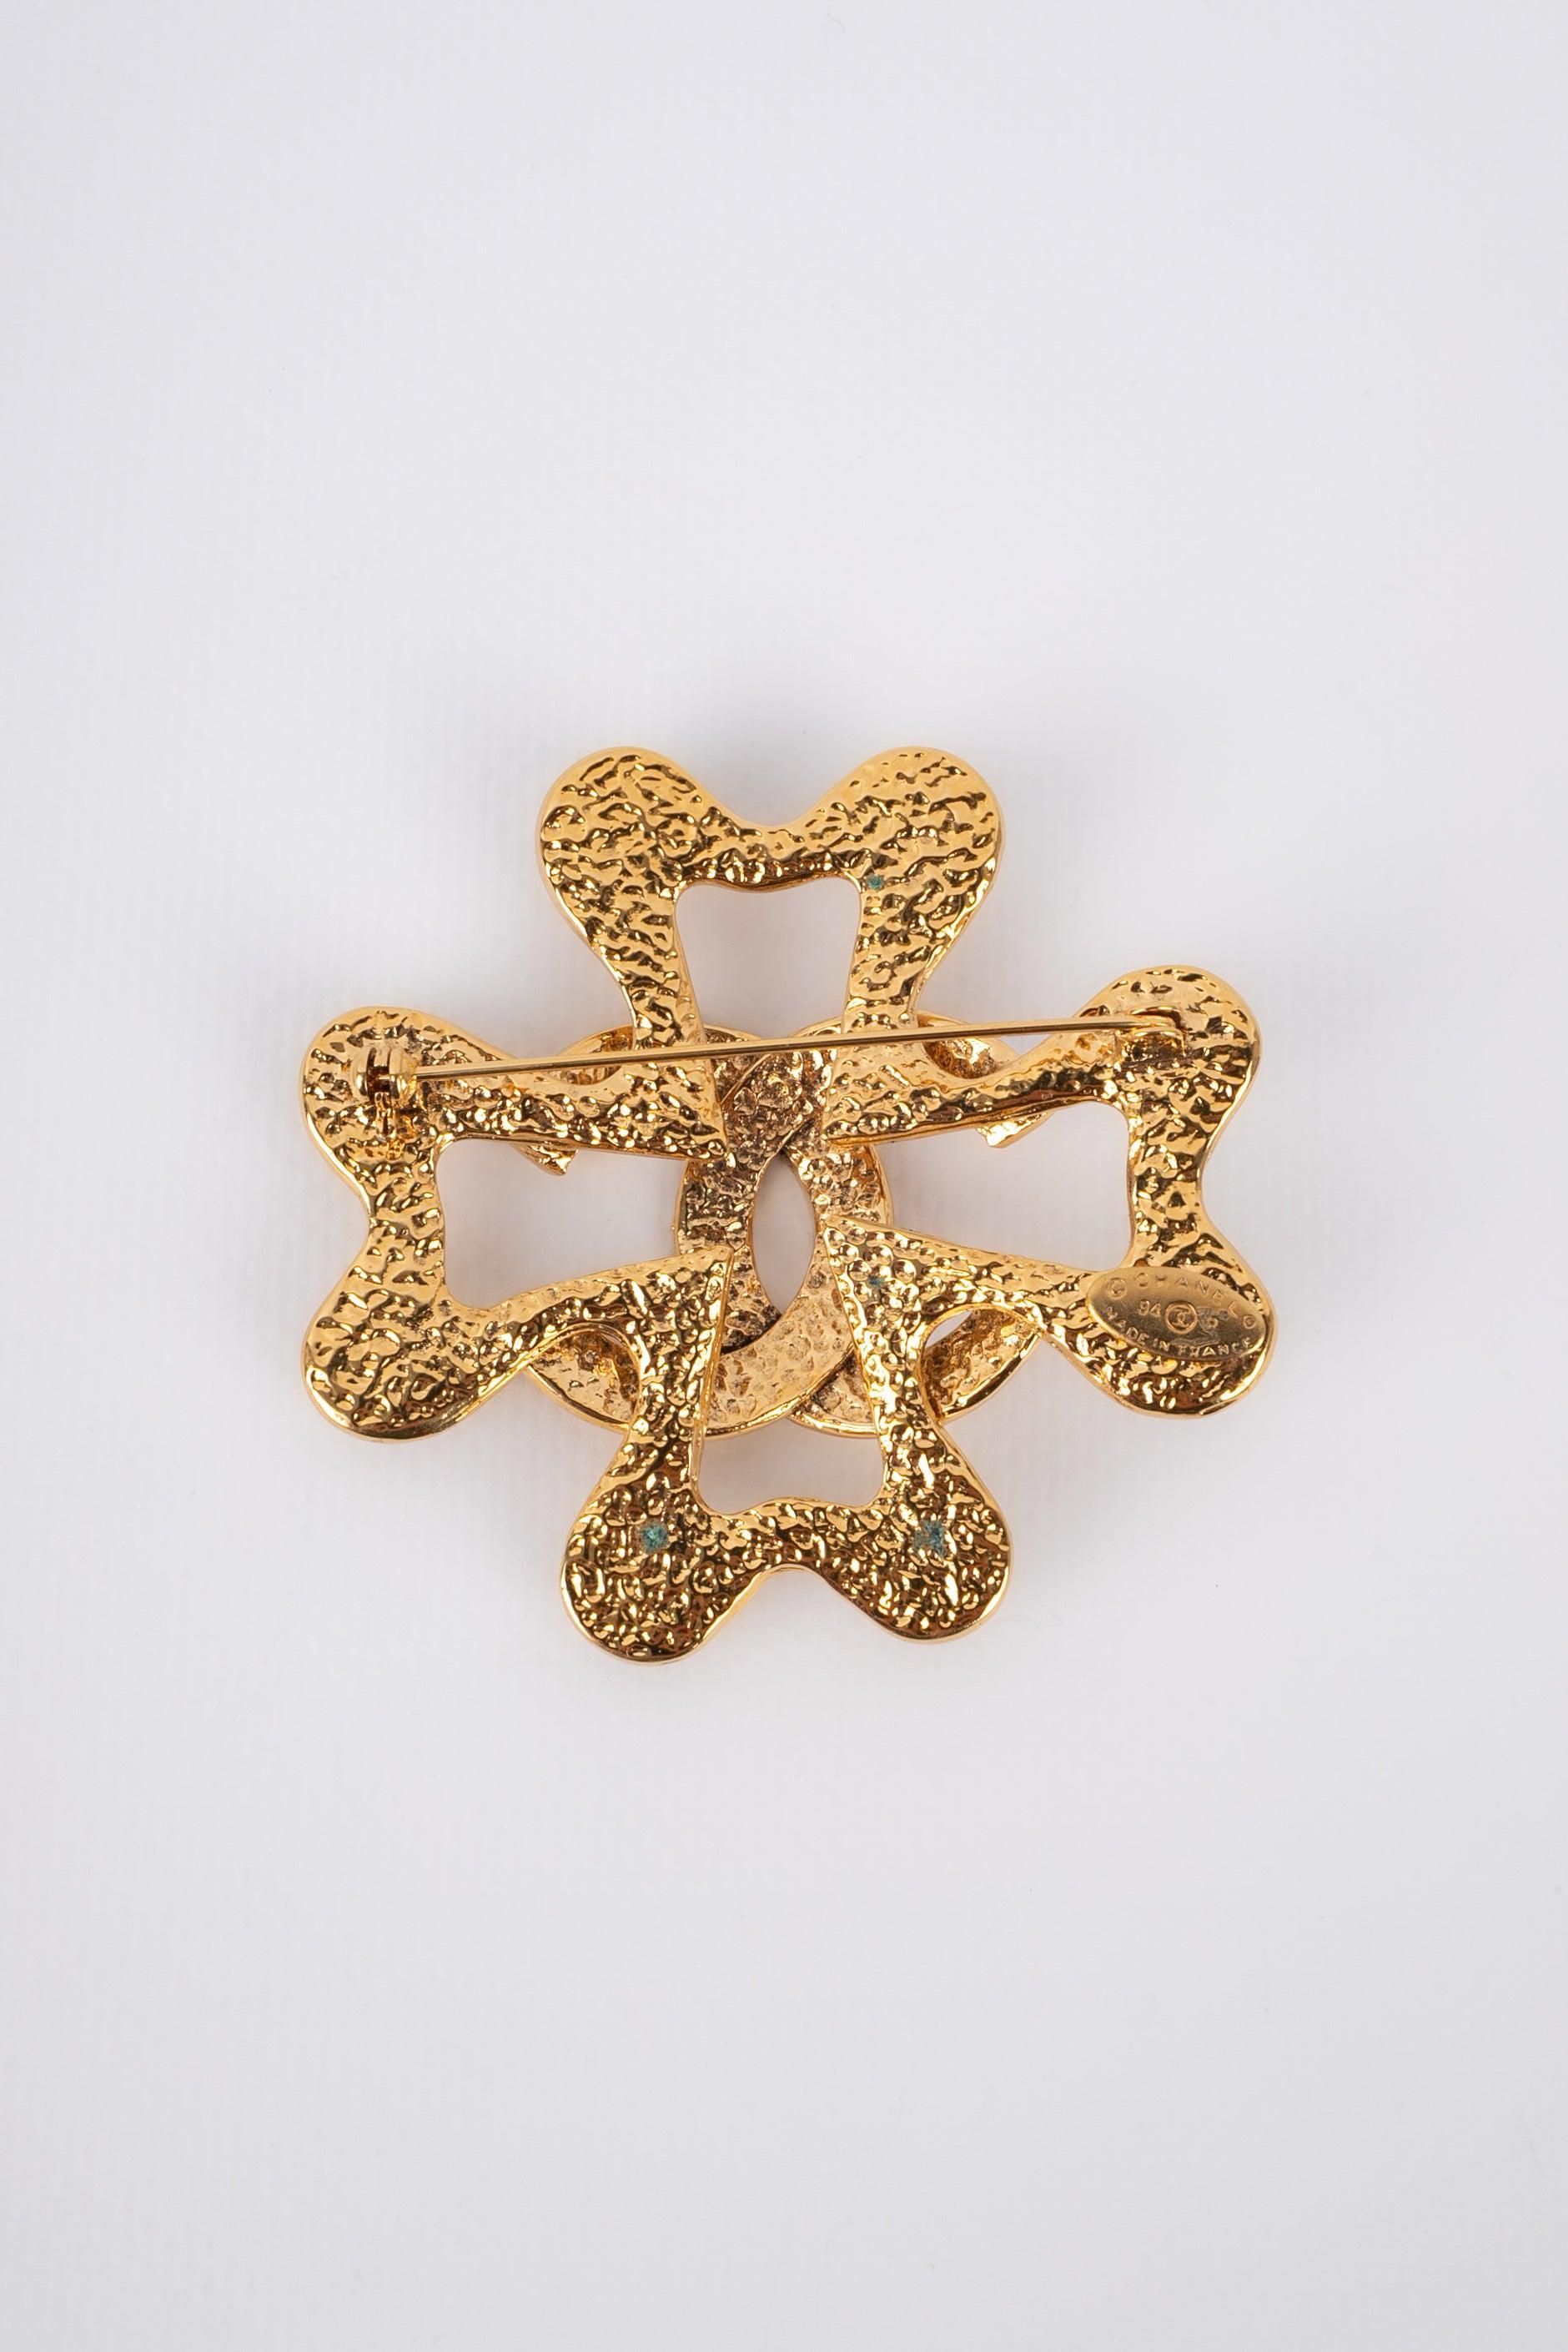 Chanel -  (Made in France) Golden metal brooch representing a flower centered with a cc logo. 1995 Spring-Summer Collection. Jewelry engraved with the S of sales.

Additional information:
Condition: Very good condition
Dimensions: 6.5 cm x 6